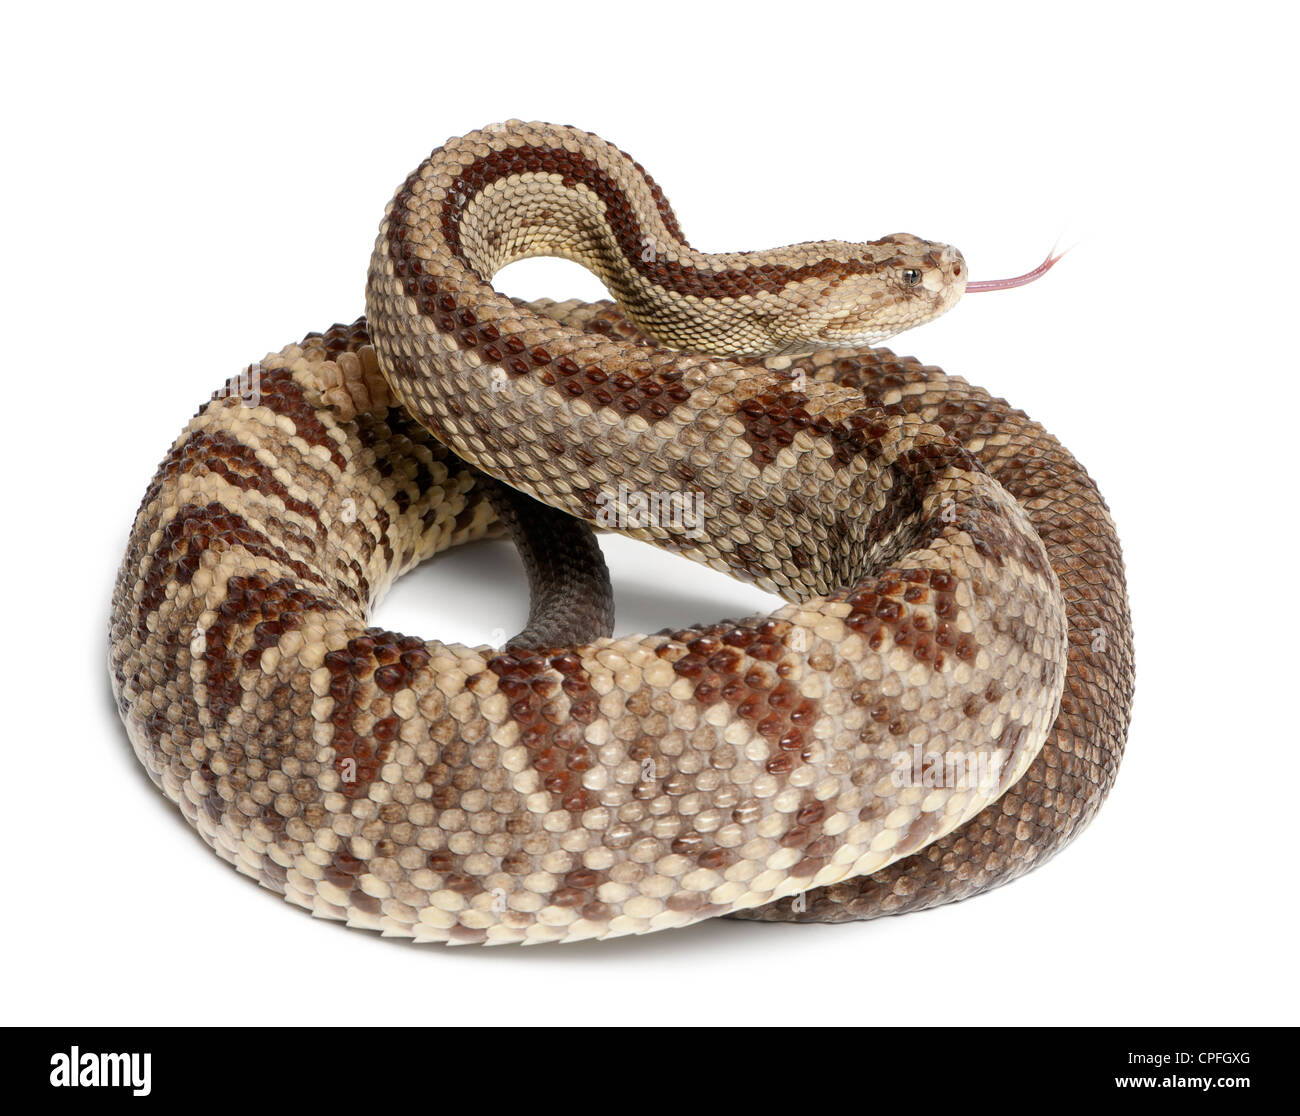 South American rattlesnake, Crotalus durissus, against white background Stock Photo